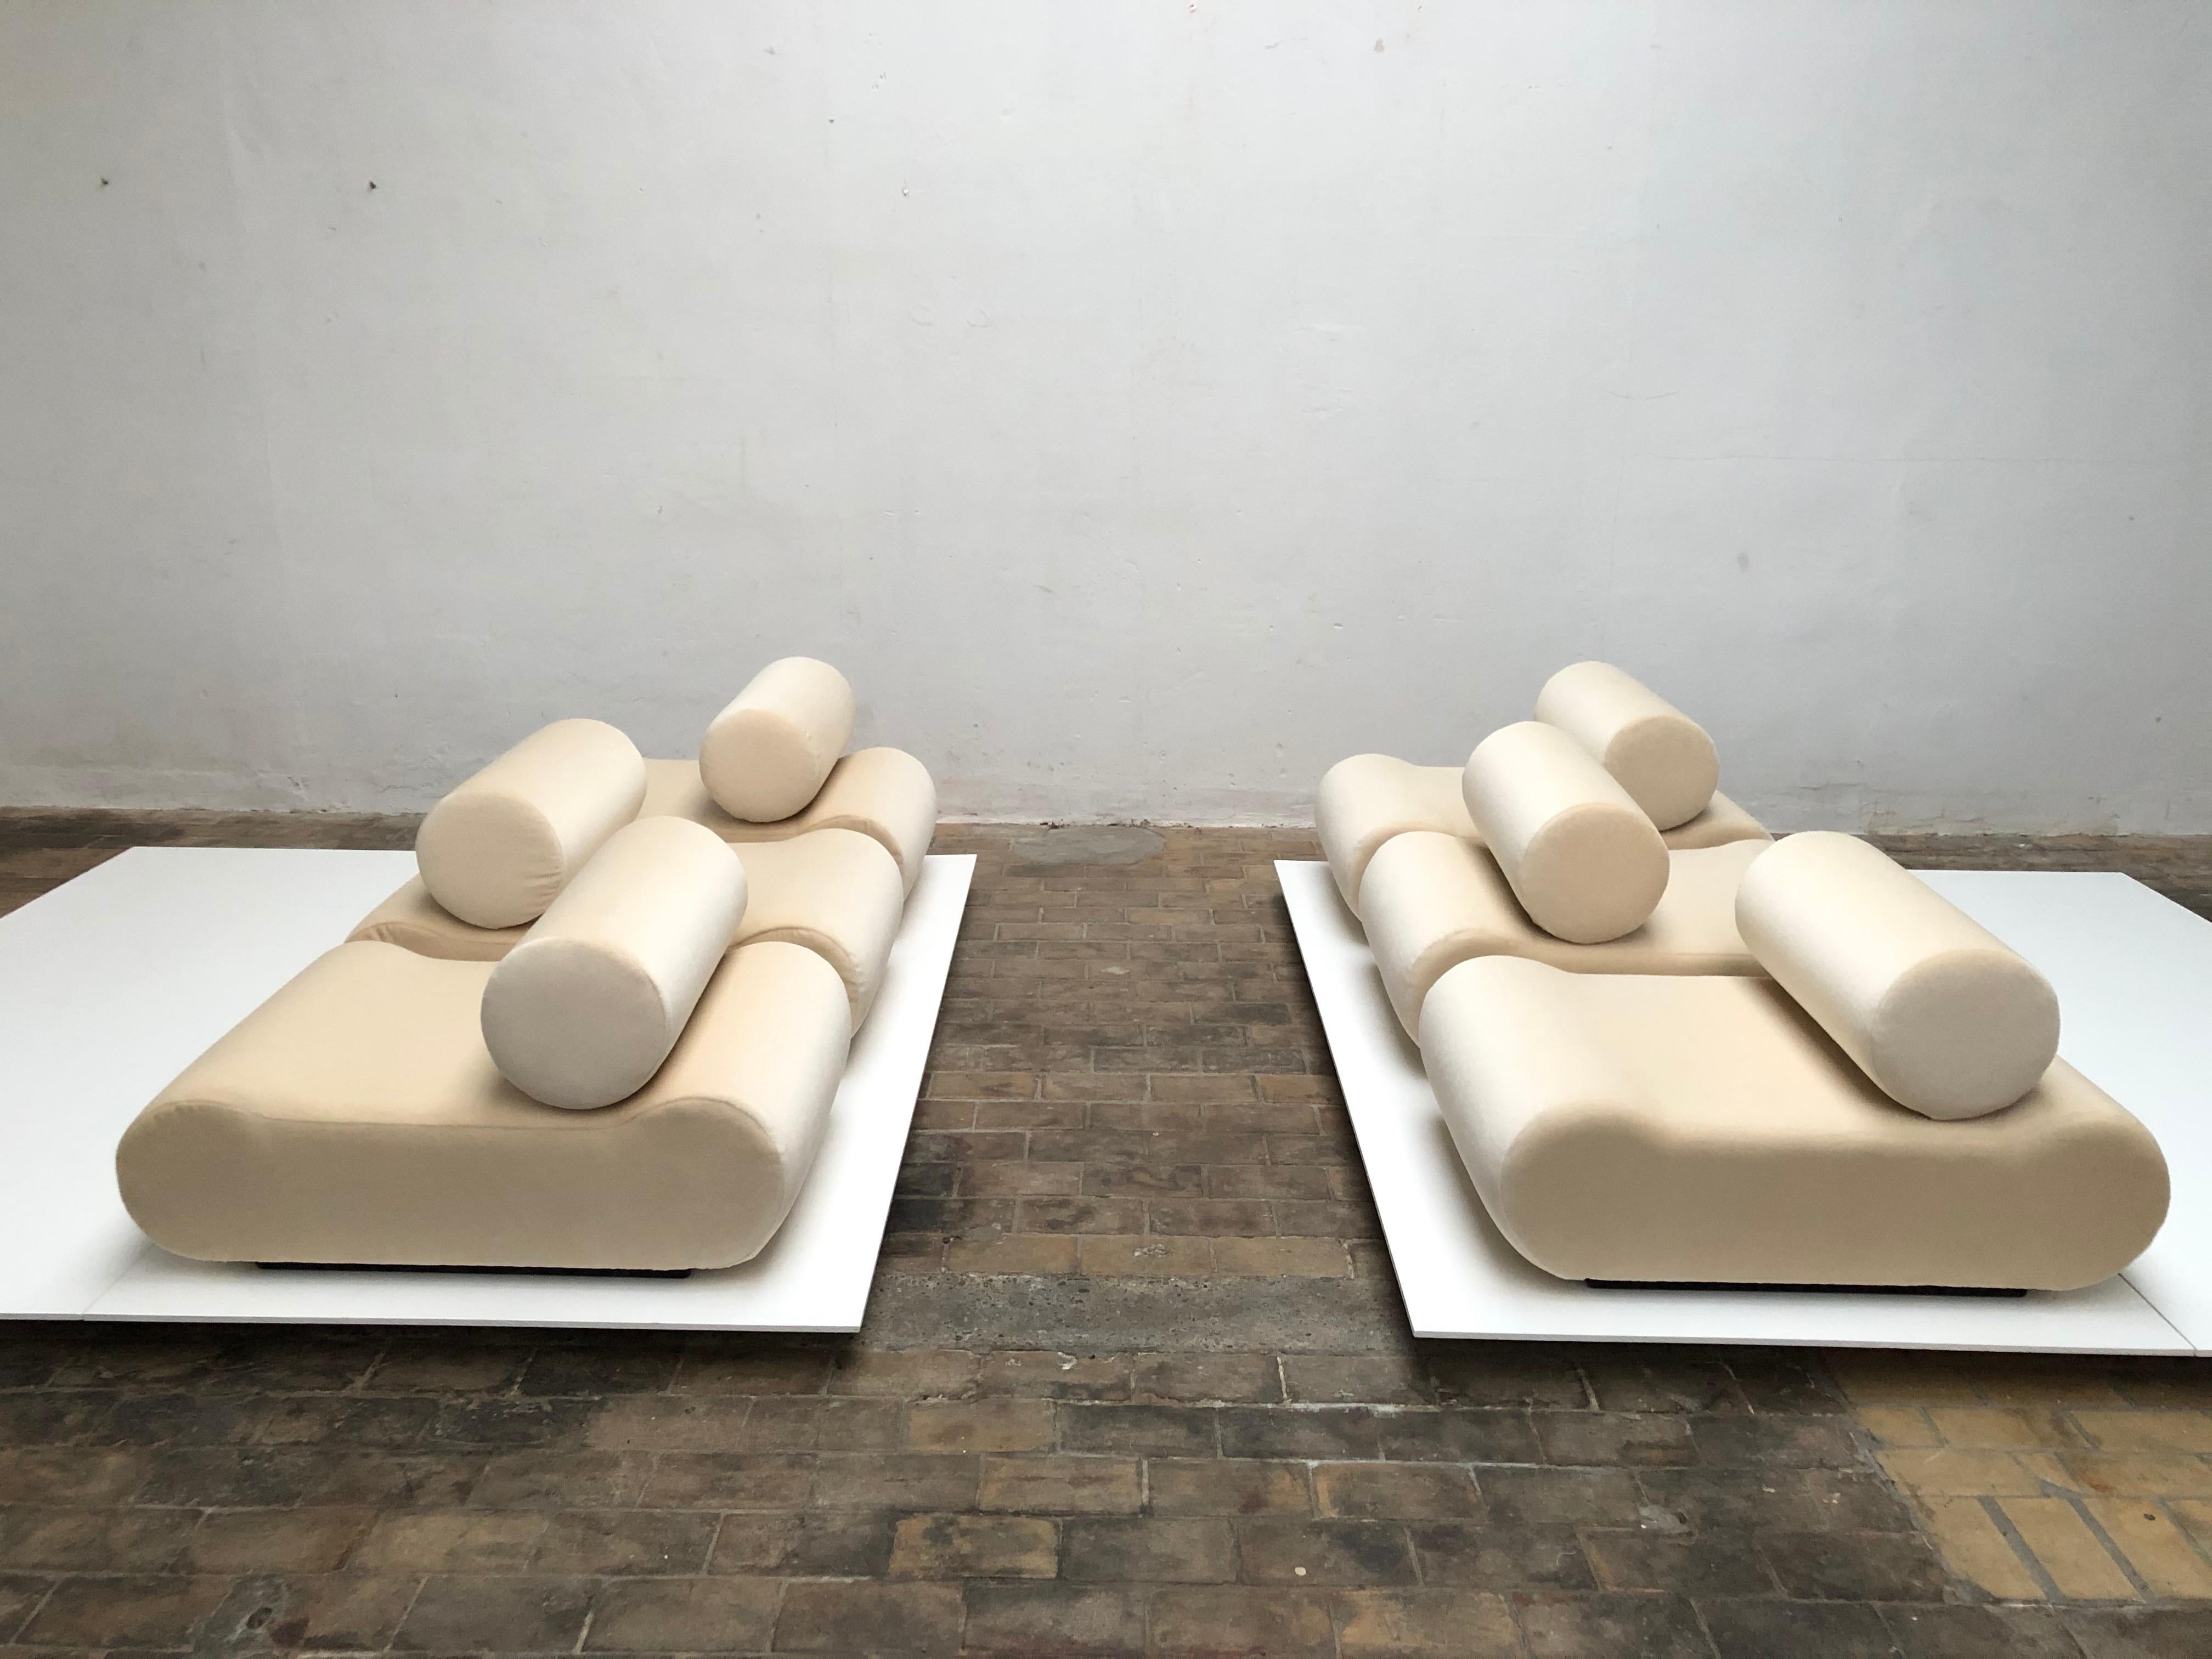 Late 20th Century Seating as Minimalist Sculpture, 6 Elements, Klaus Uredat, 1969 for COR, Germany